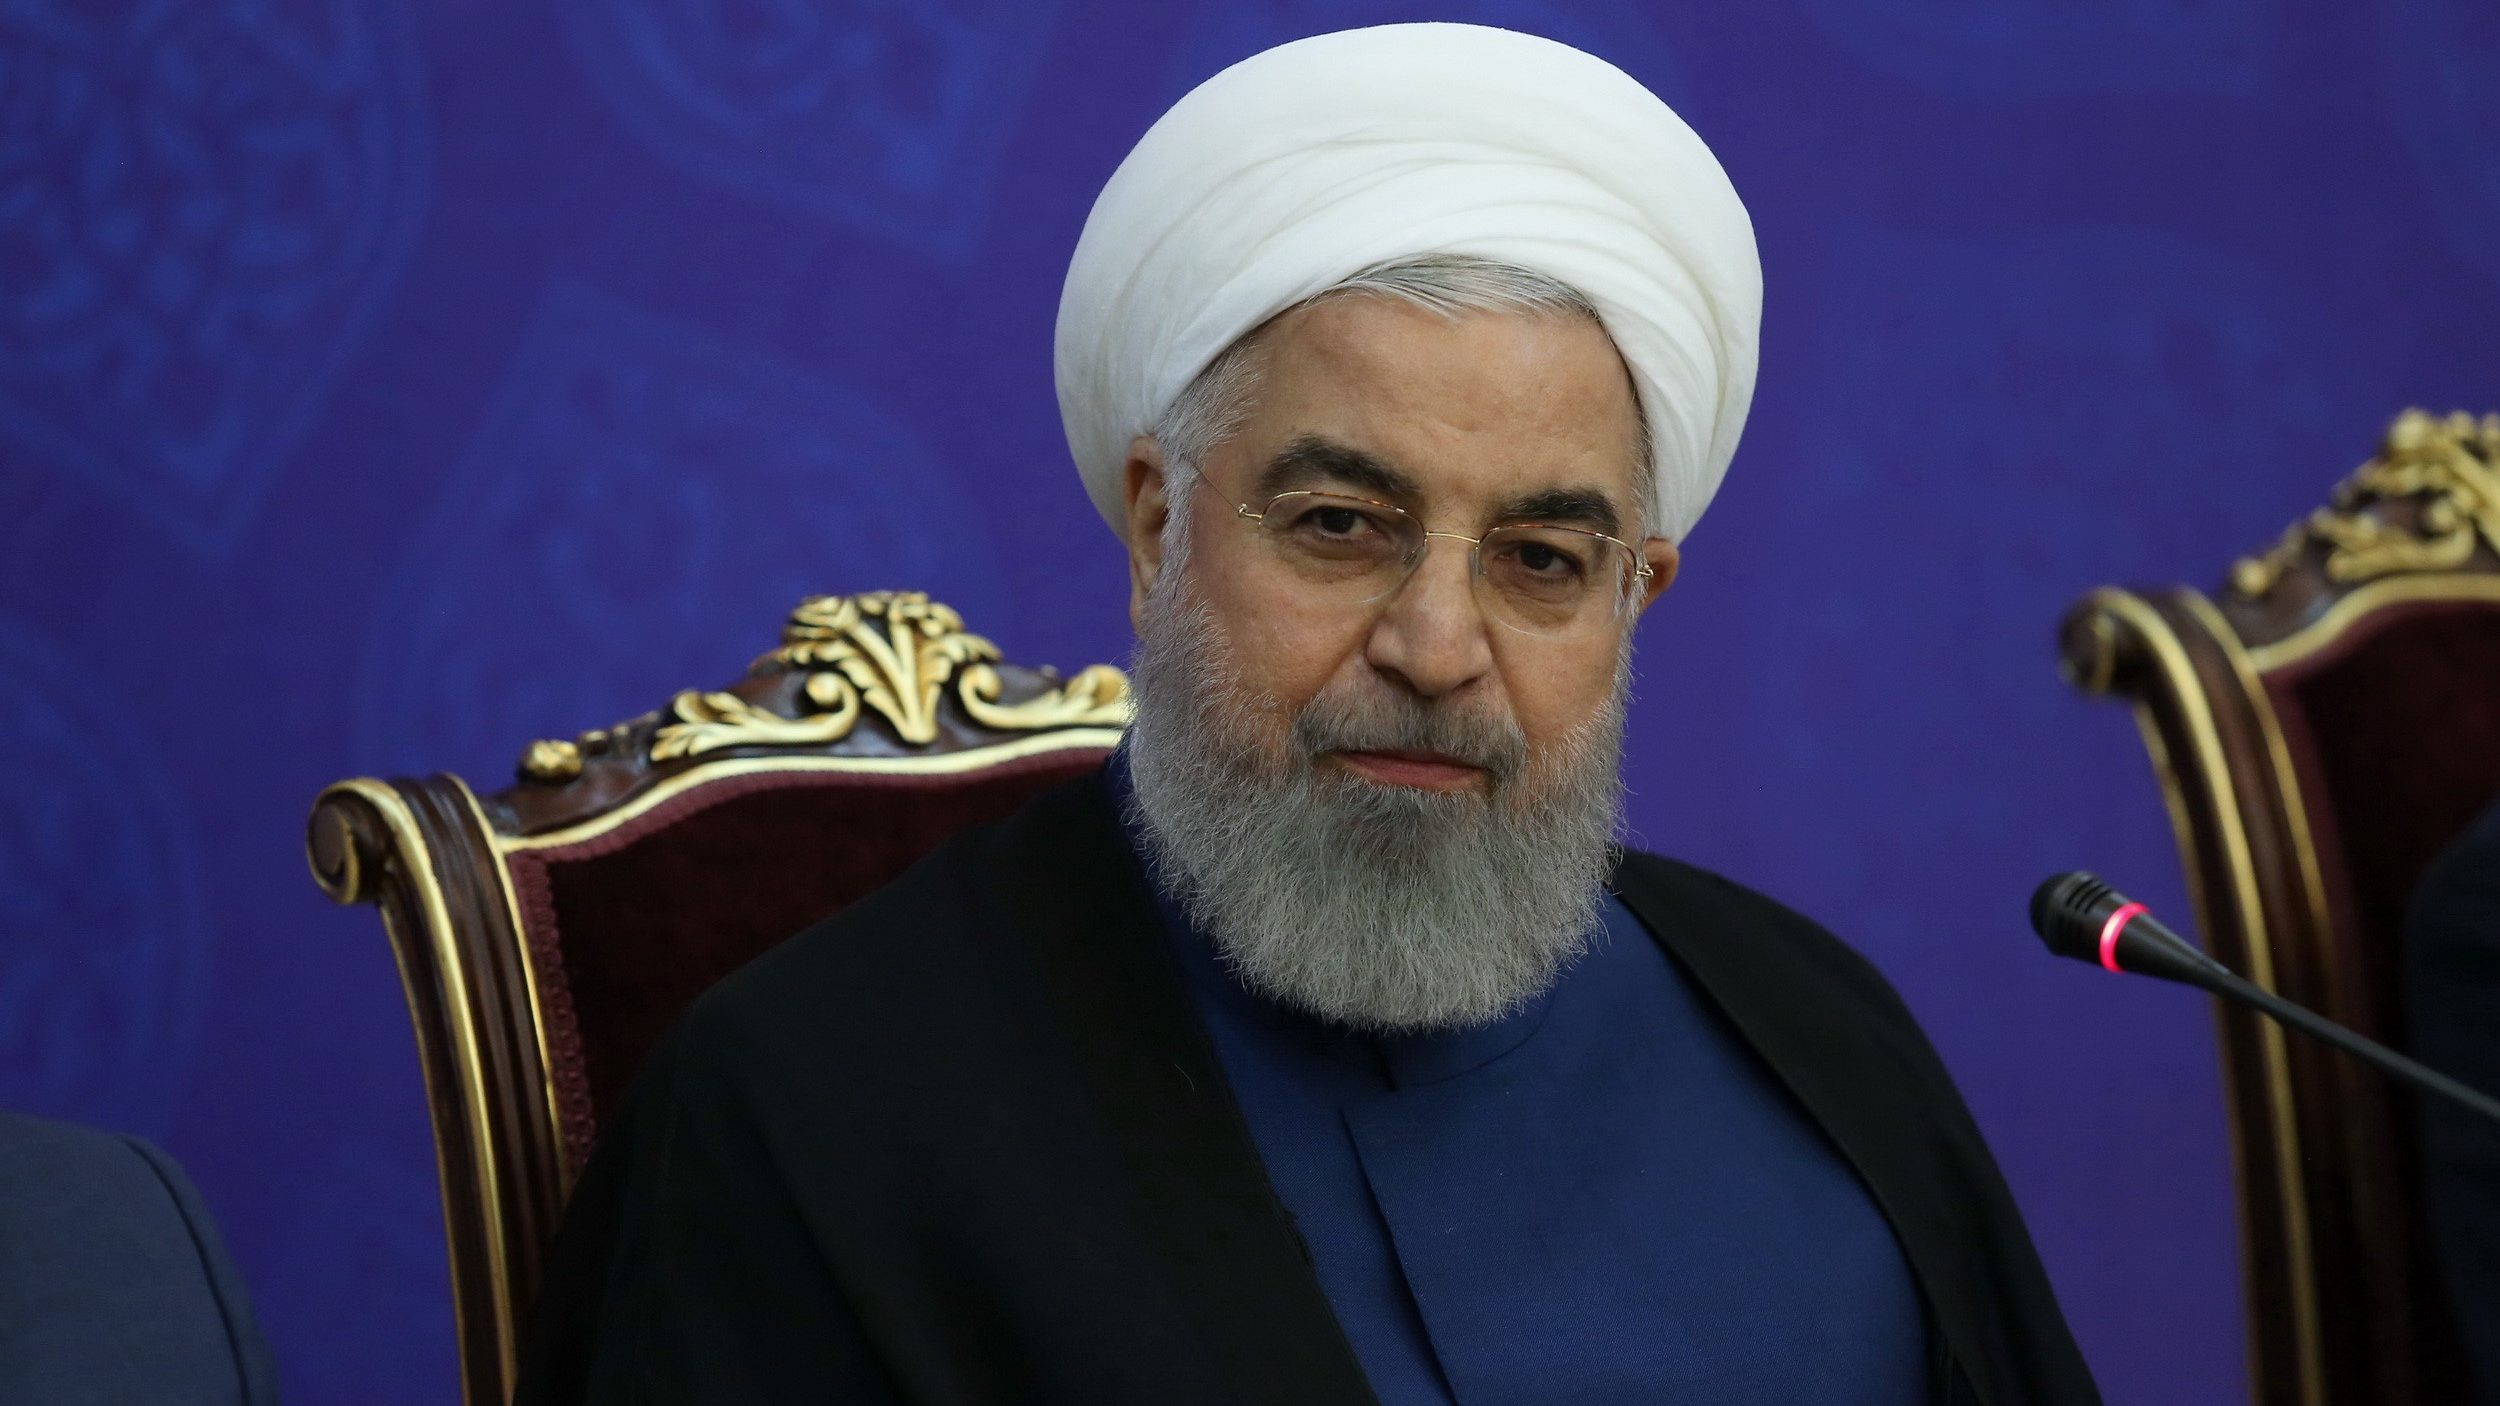 Rouhani: Situation Not Suitable for Talks, ‘Resistance’ Our Only Choice